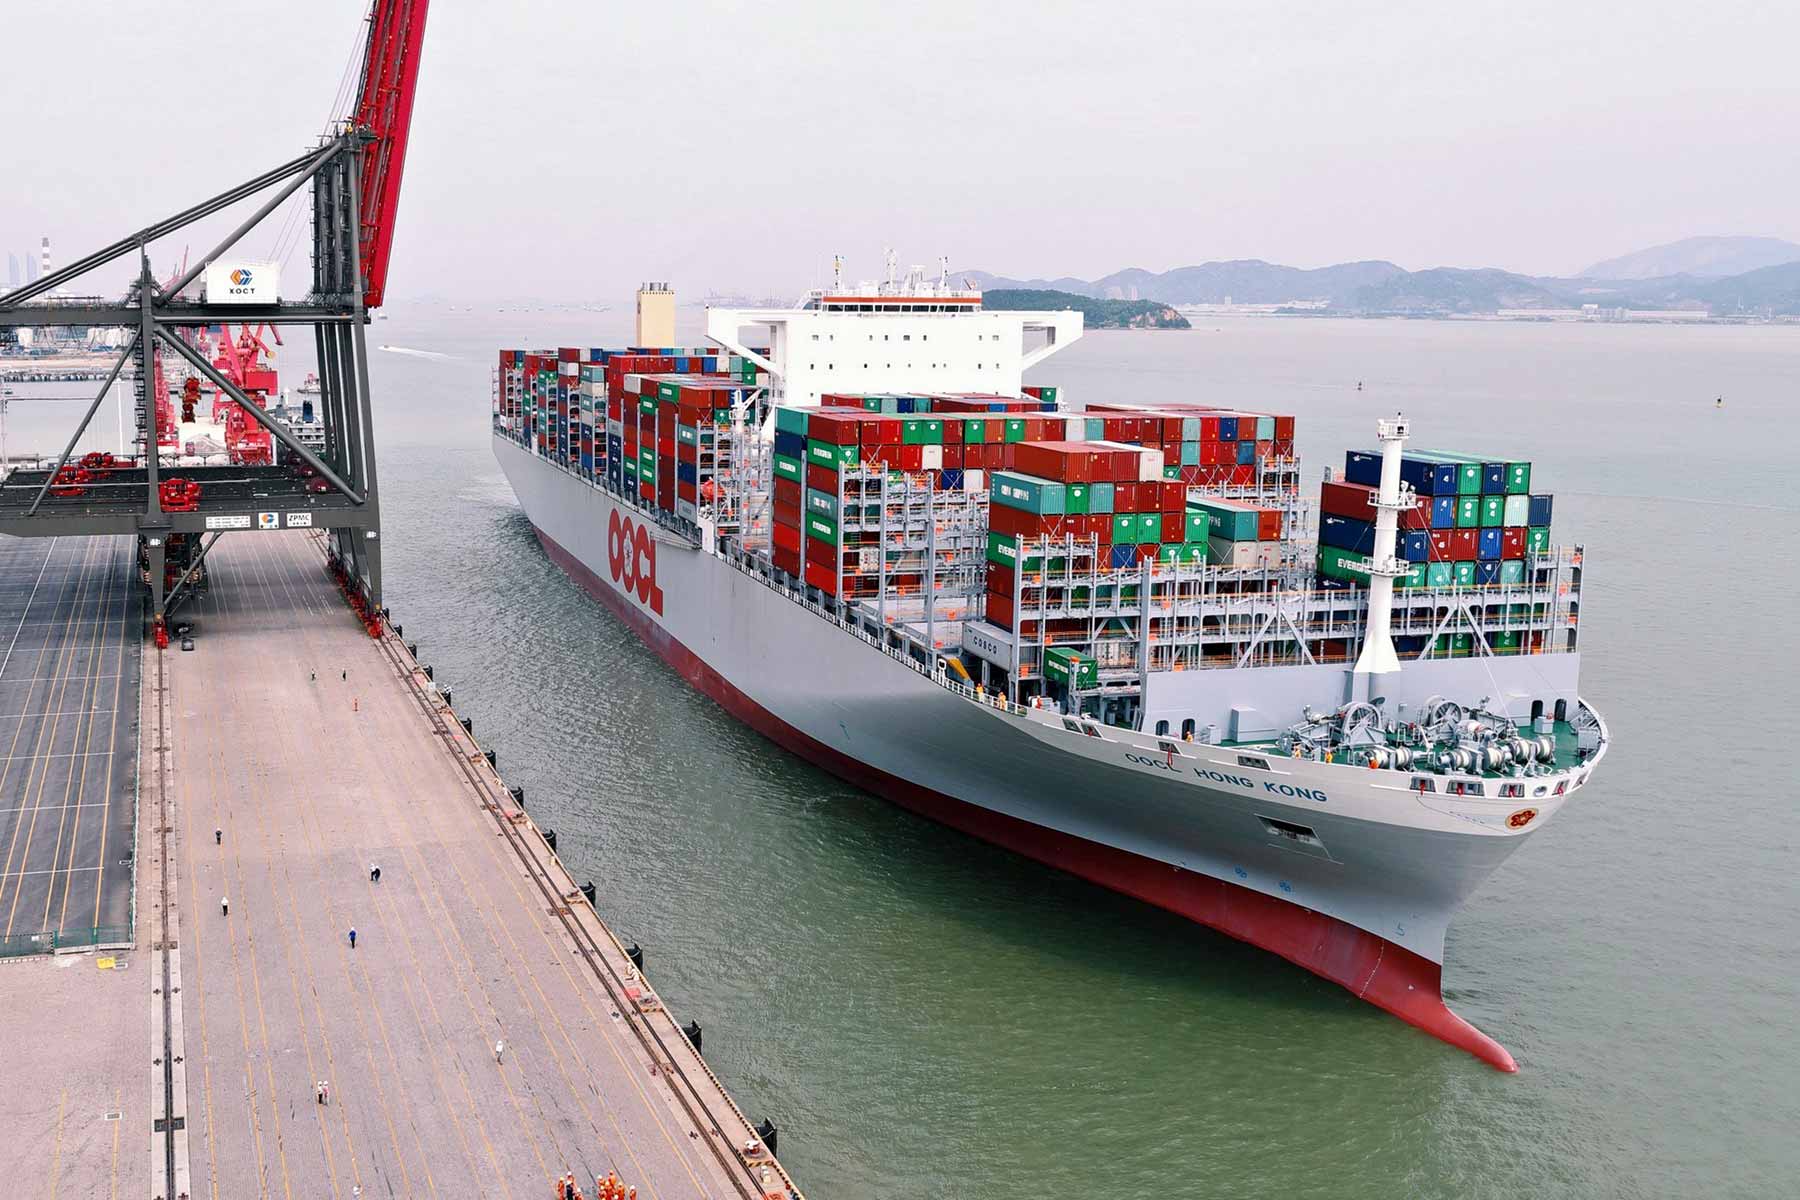 Tremendous growth for OOCL in European trades